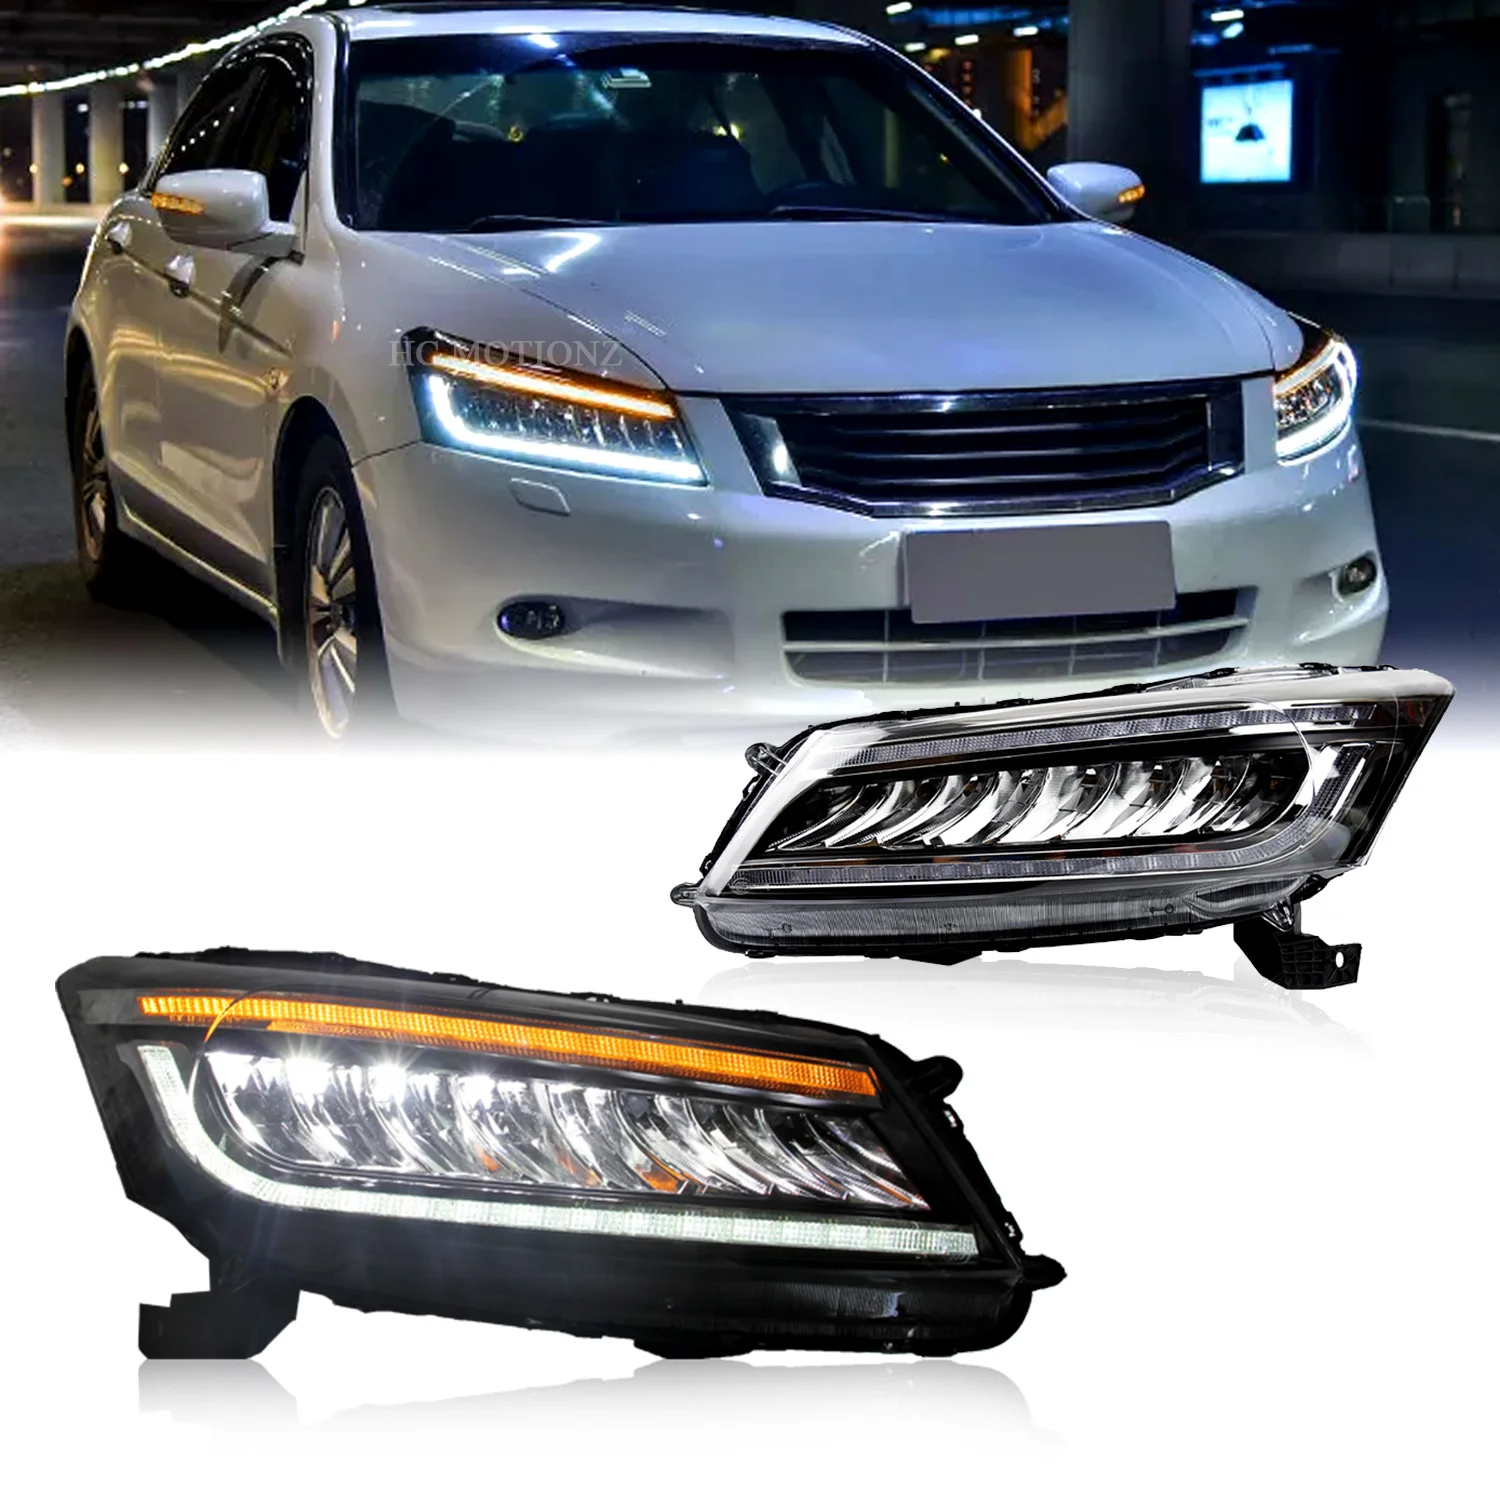 

HCMOTIONZ Factory Start up Animation Headlights 2008-2012 Support for US shipments FULL LED Head lights For Honda Accord